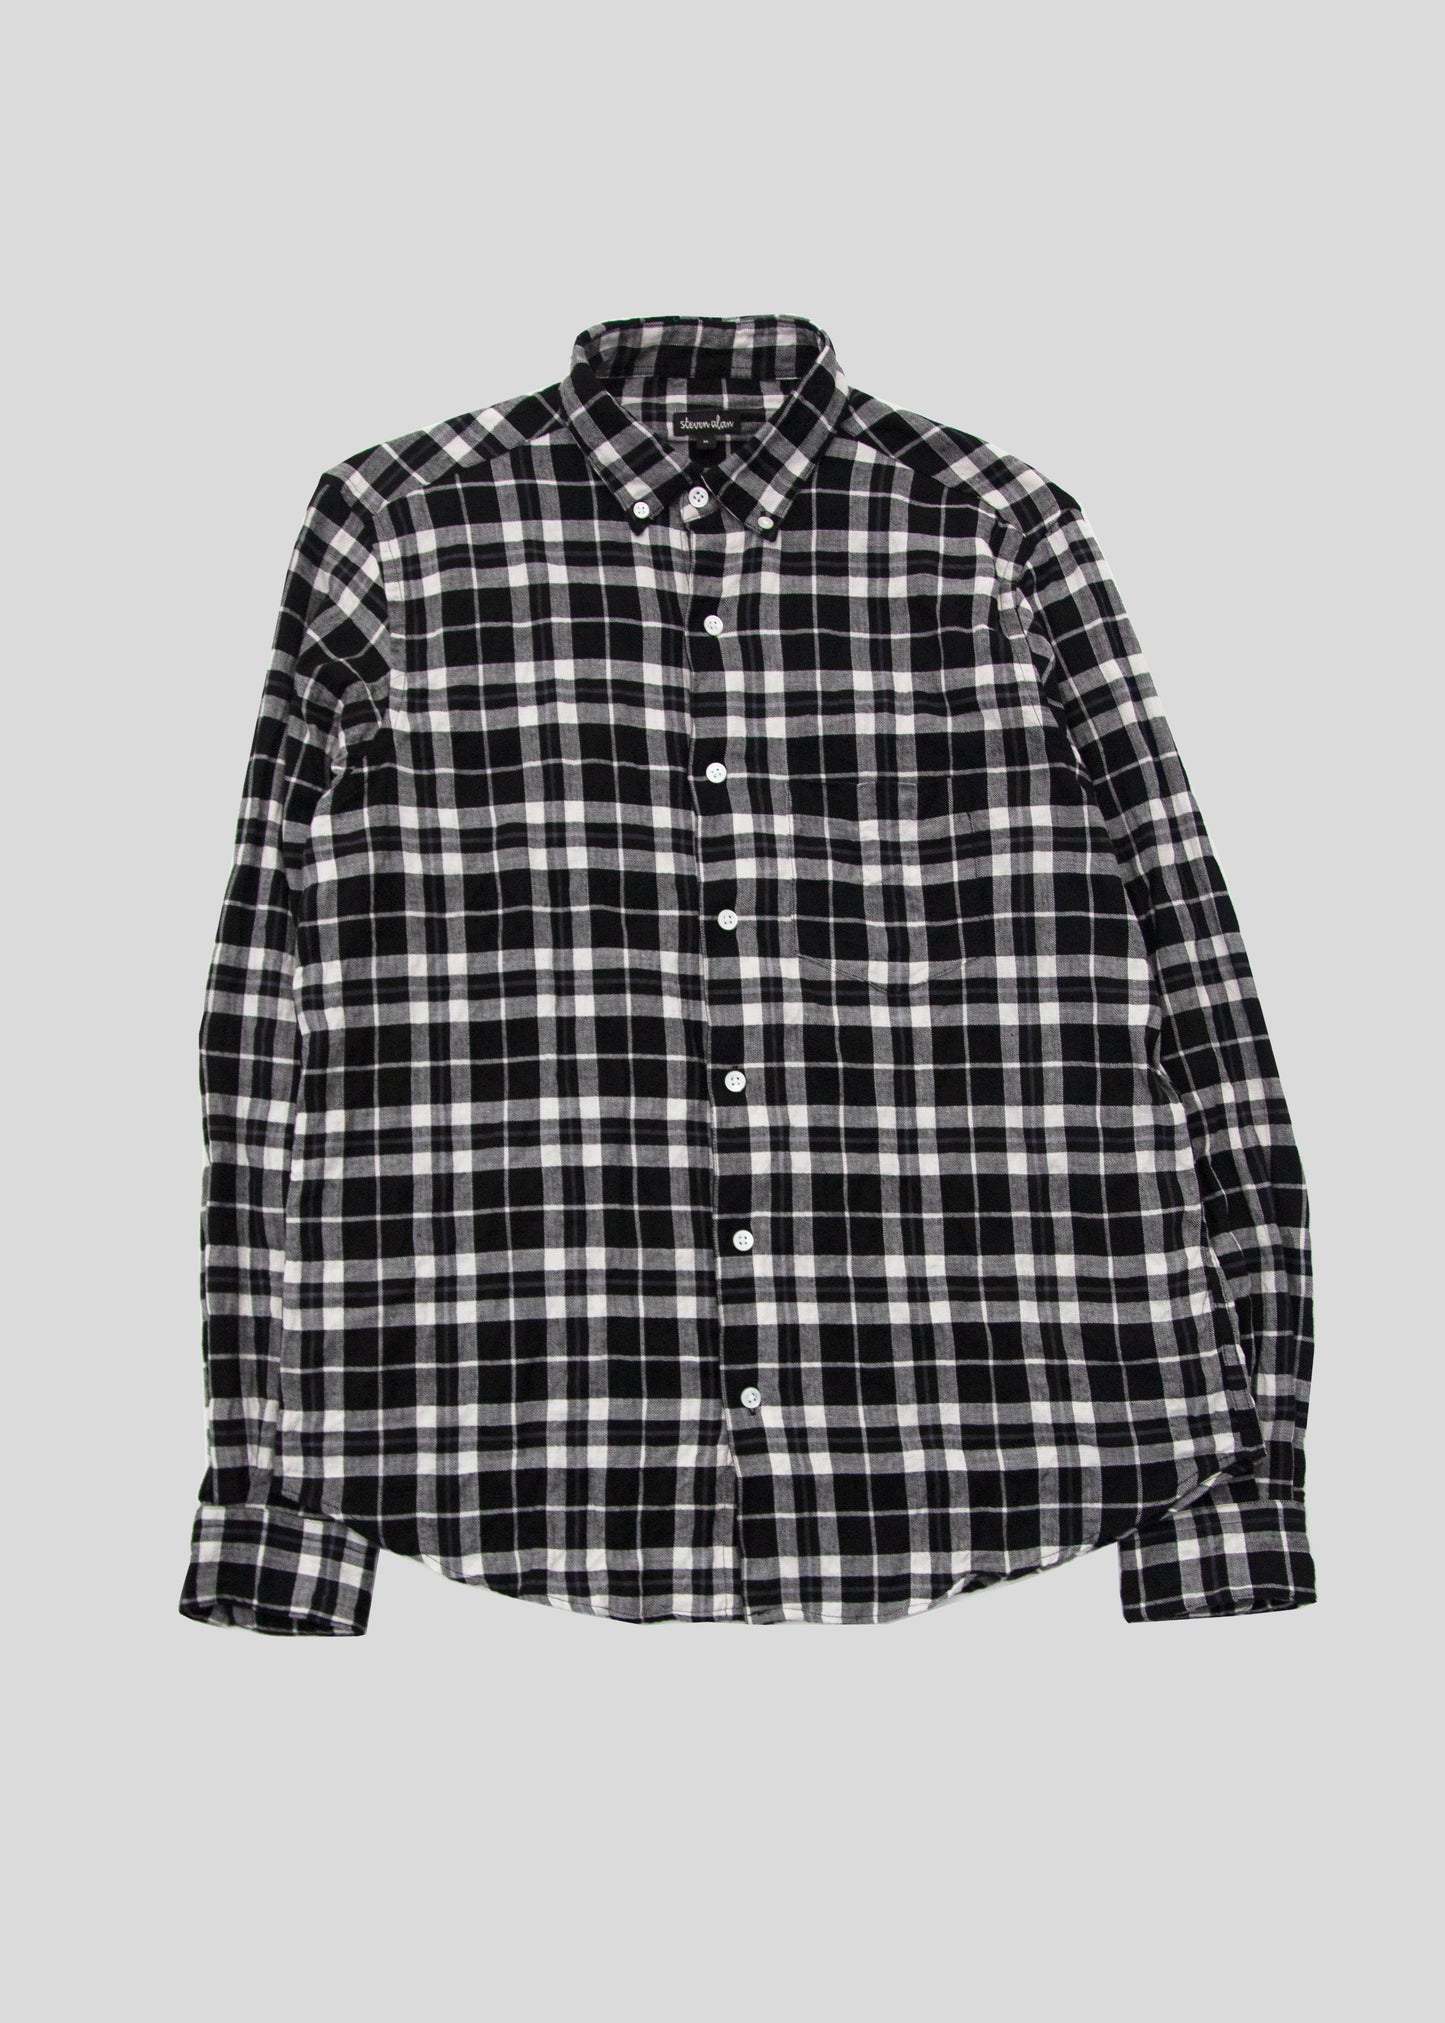 Single Needle Shirt, Black and White Pucker Flannel